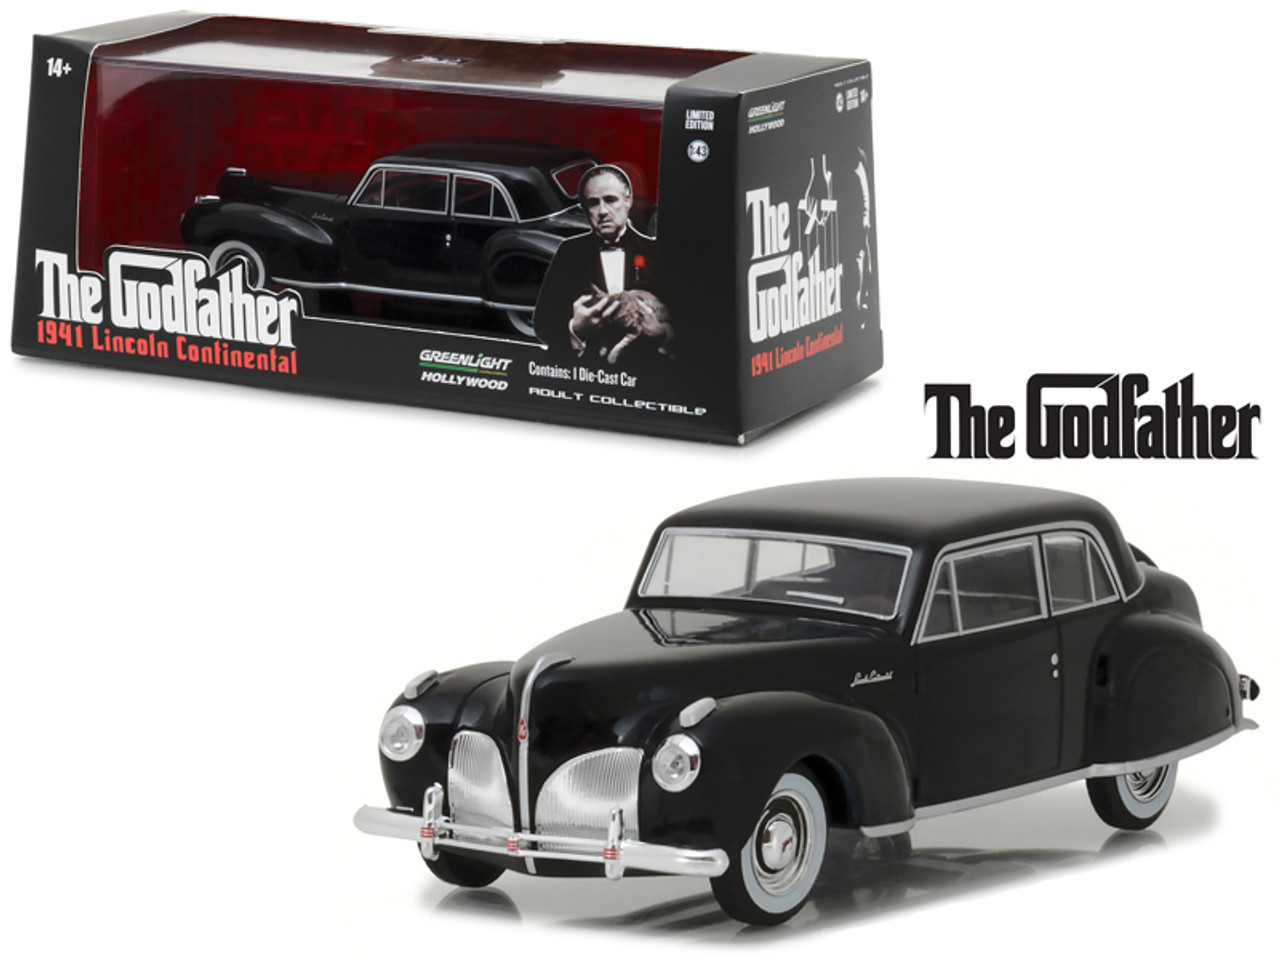 1941 Lincoln Continental Black "The Godfather" (1972) Movie 1/43 Diecast Model Car by Greenlight